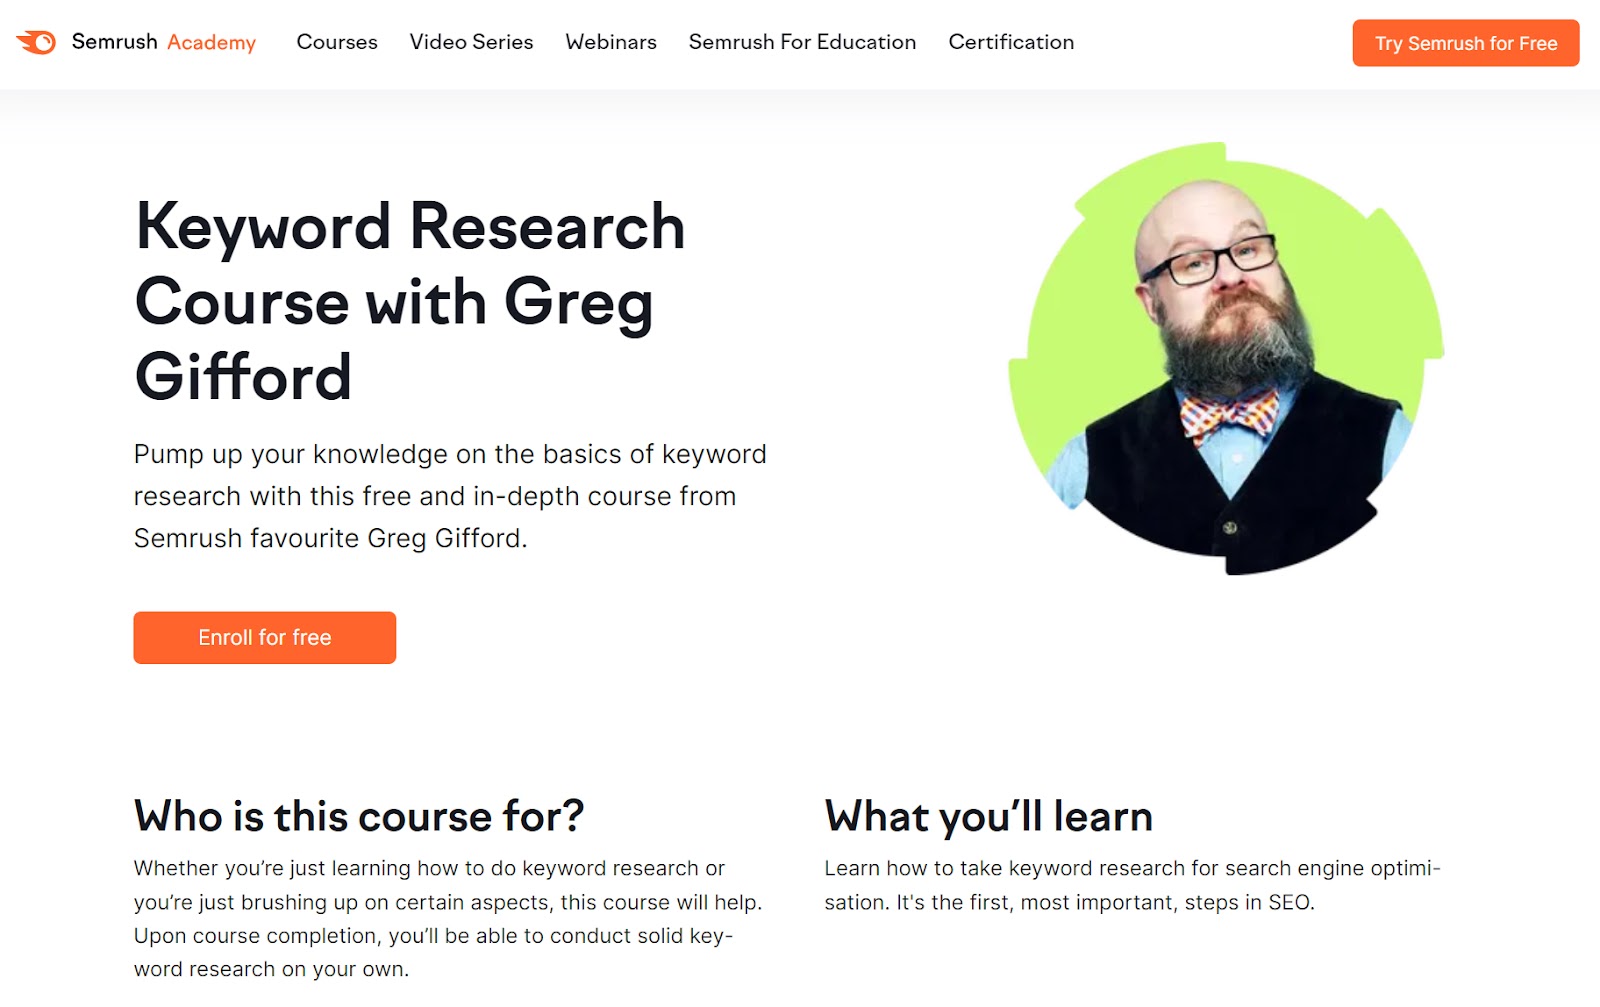 Keyword Research Course with Greg Gifford landing page